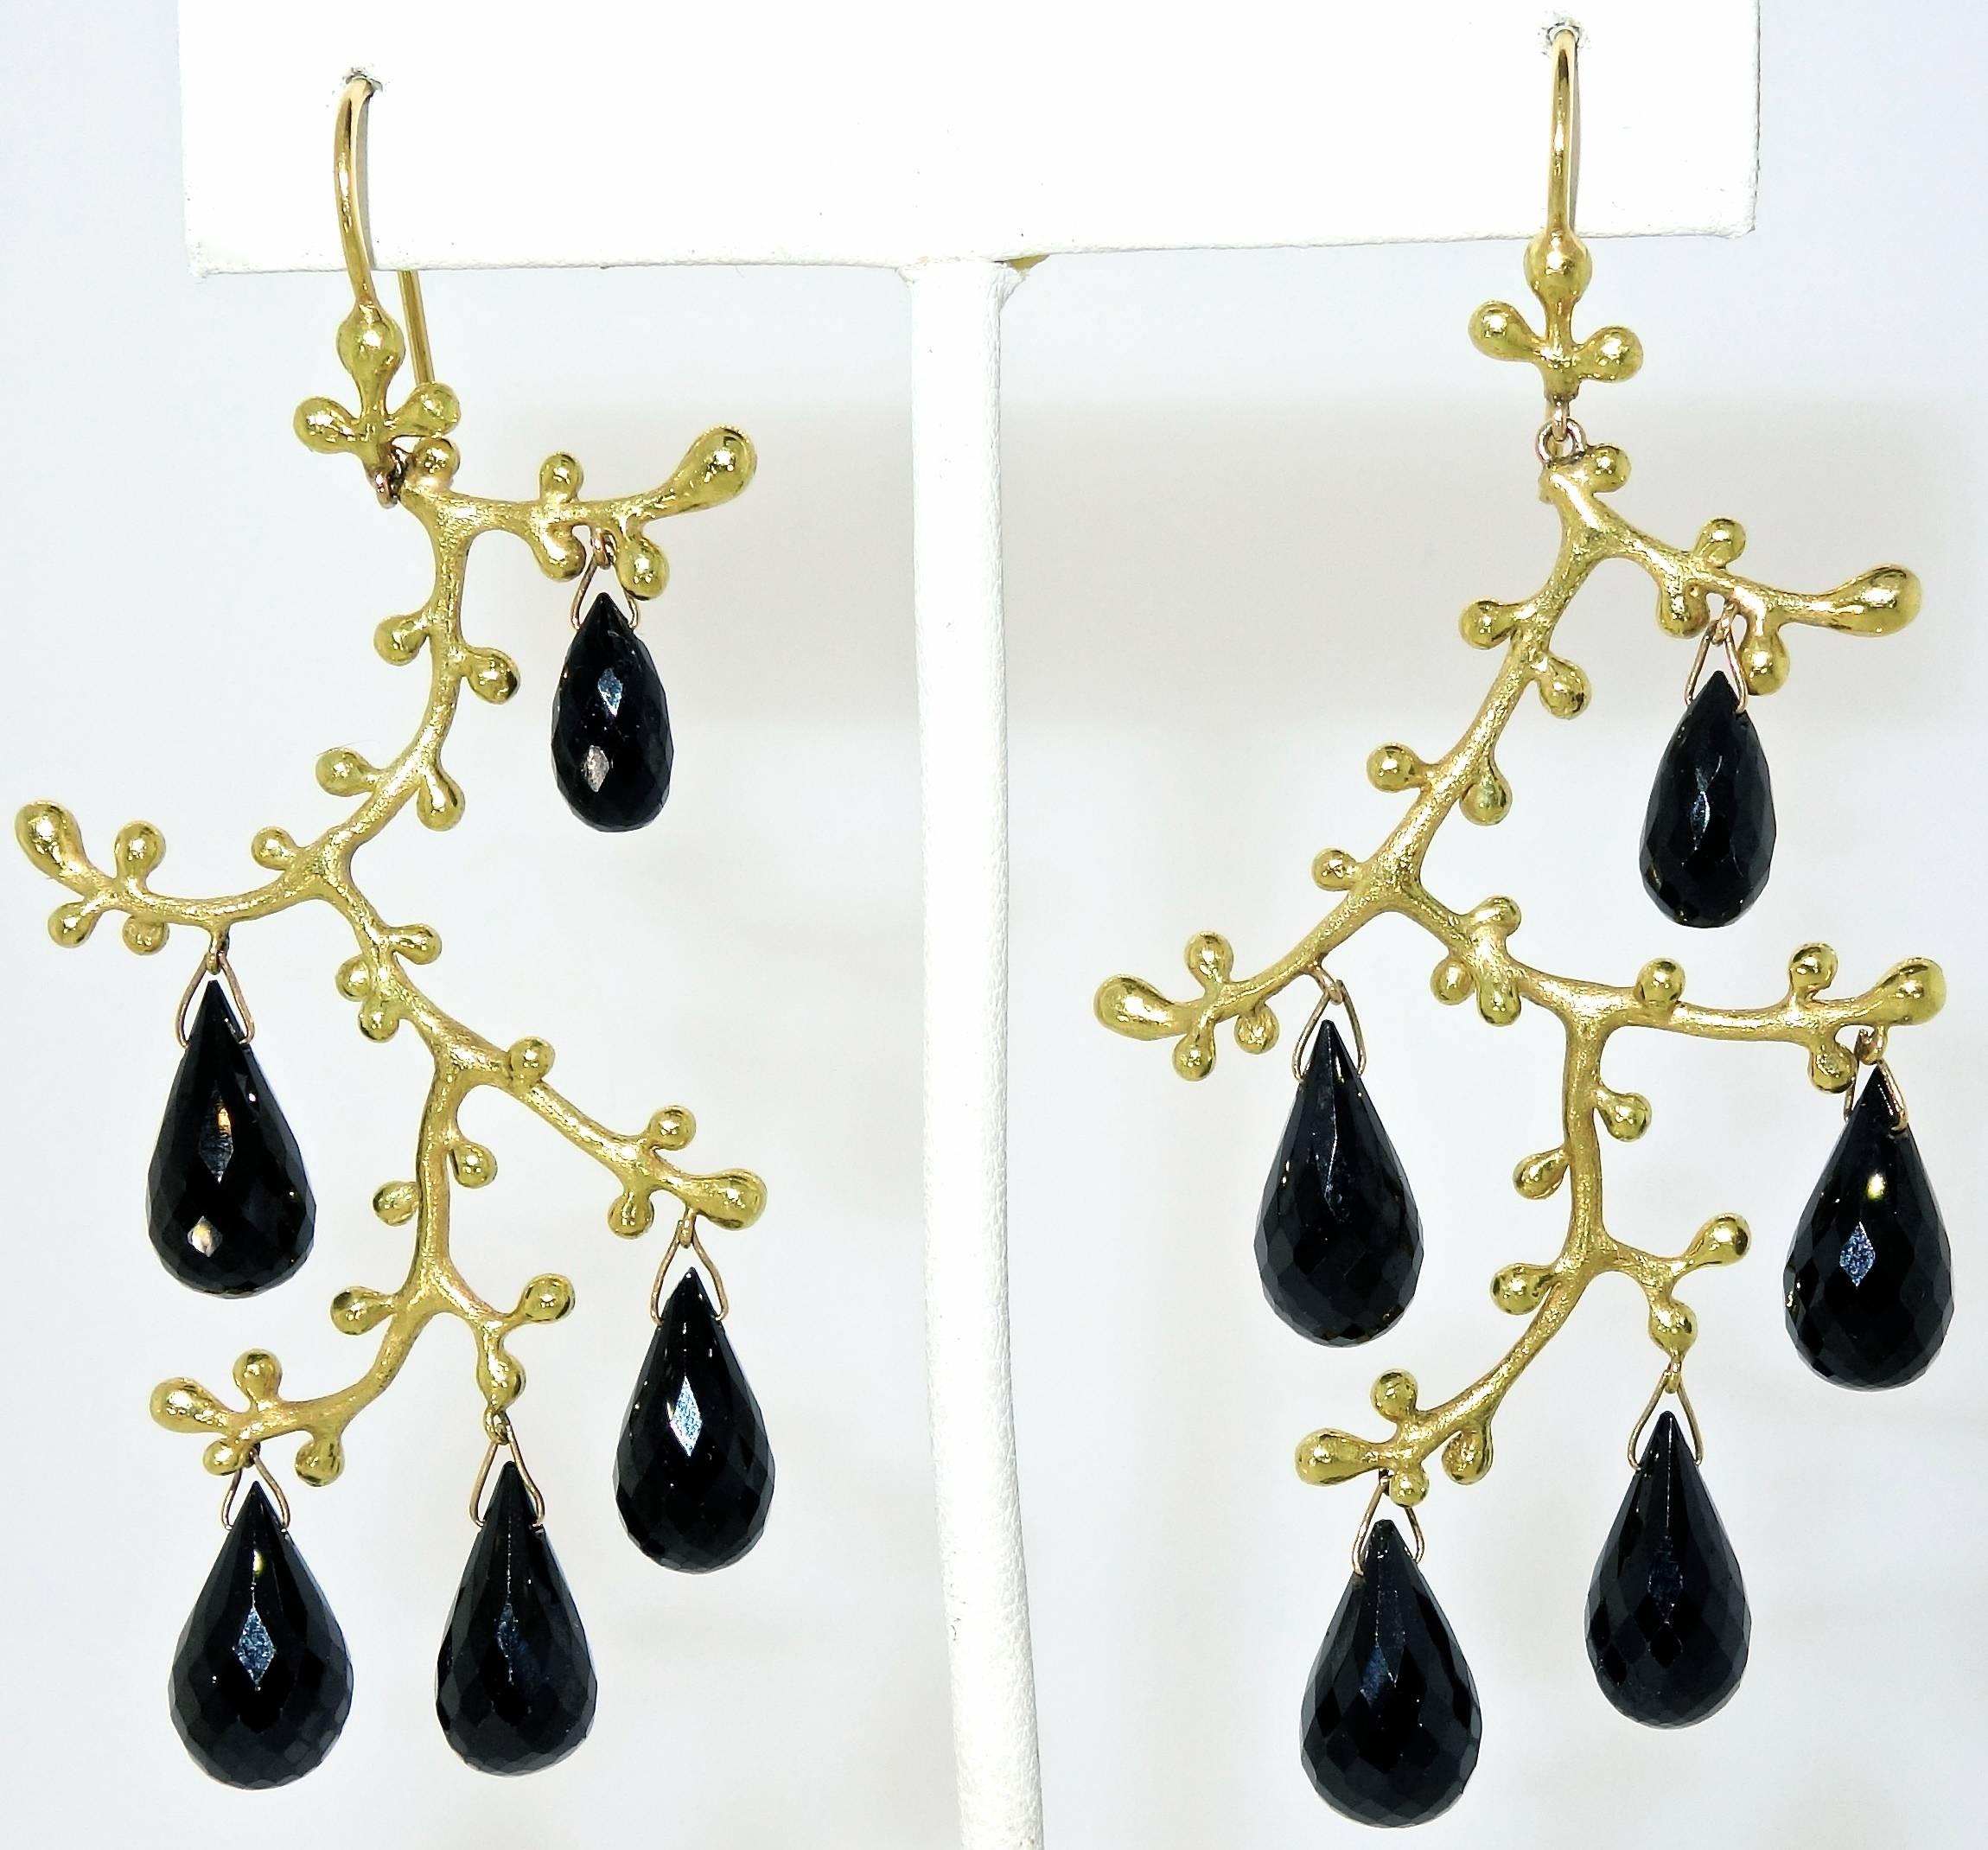 18K yellow gold hanging earrings with 10 faceted briolette cut onyx weighing approximately 10 cts. These earrings are three inches in length and weigh 22.7 grams.